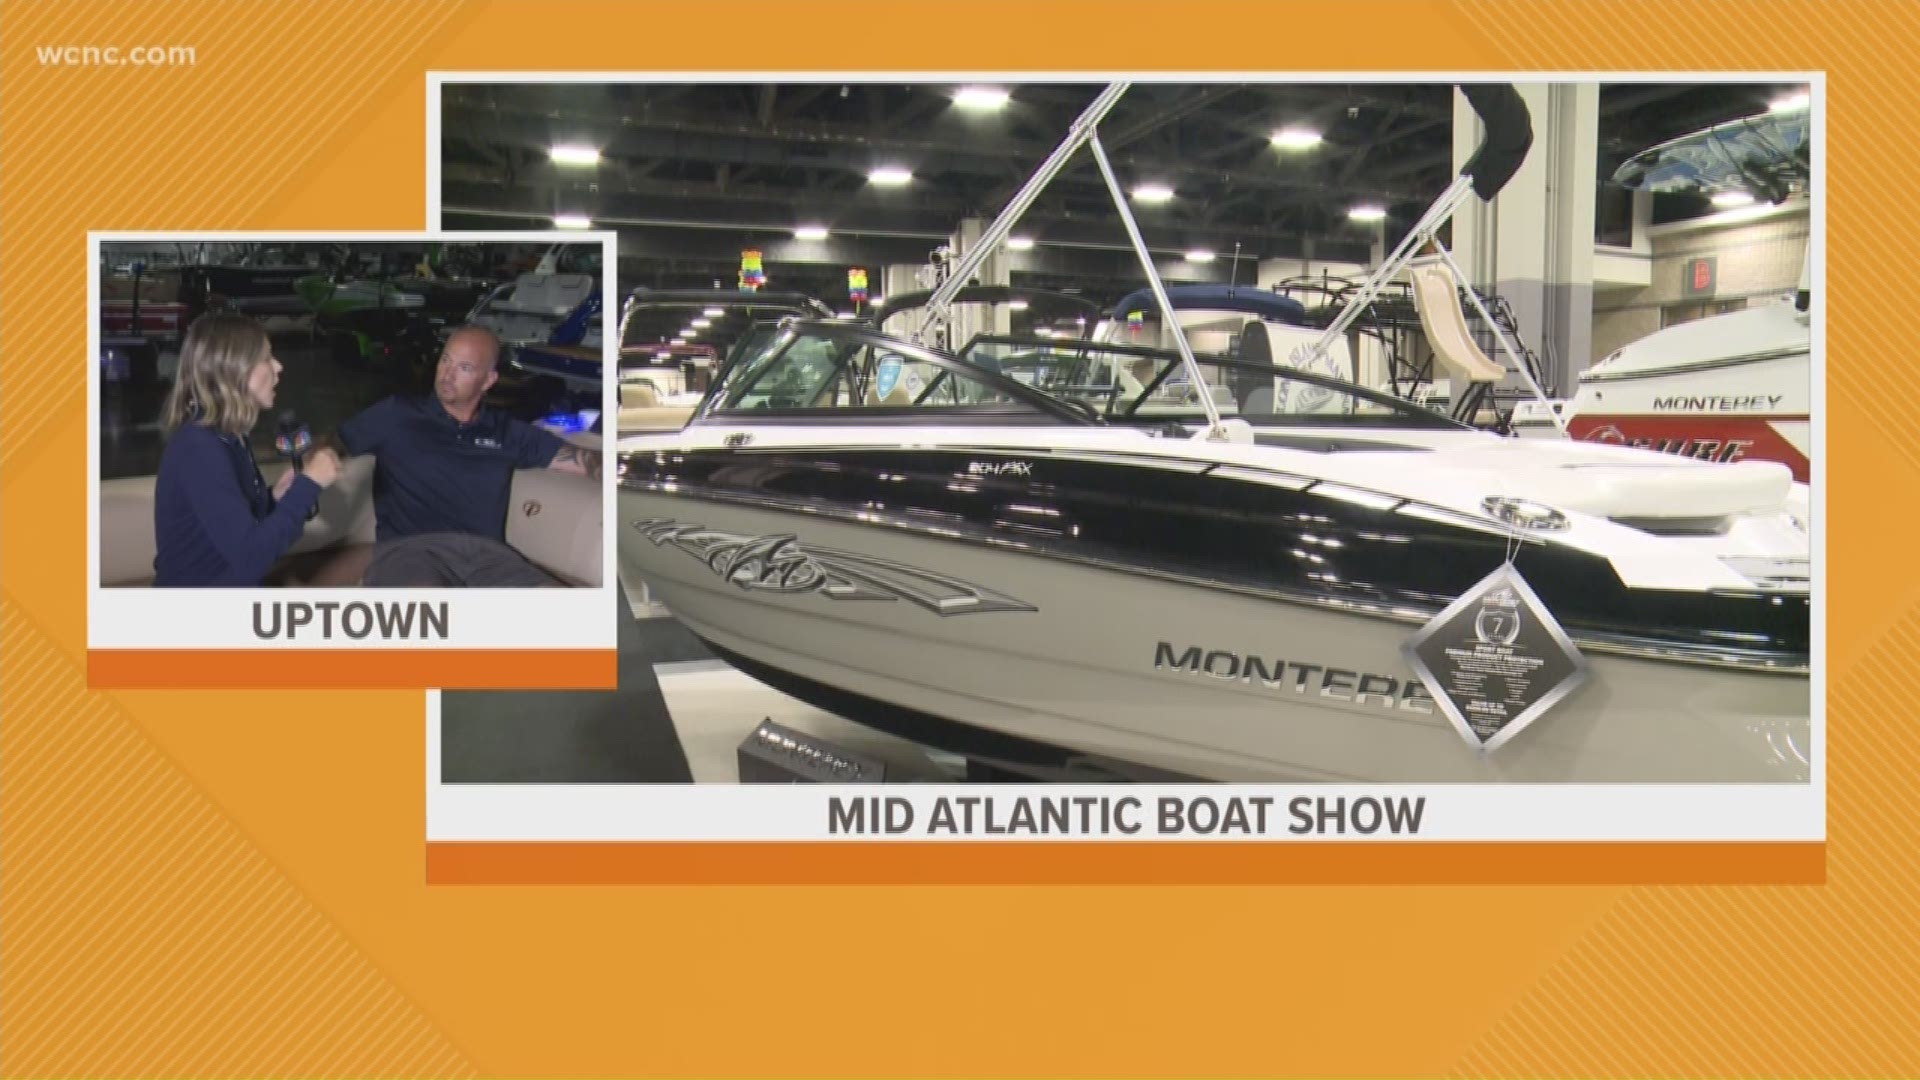 The Mid Atlantic Boat Show has arrived in Charlotte.